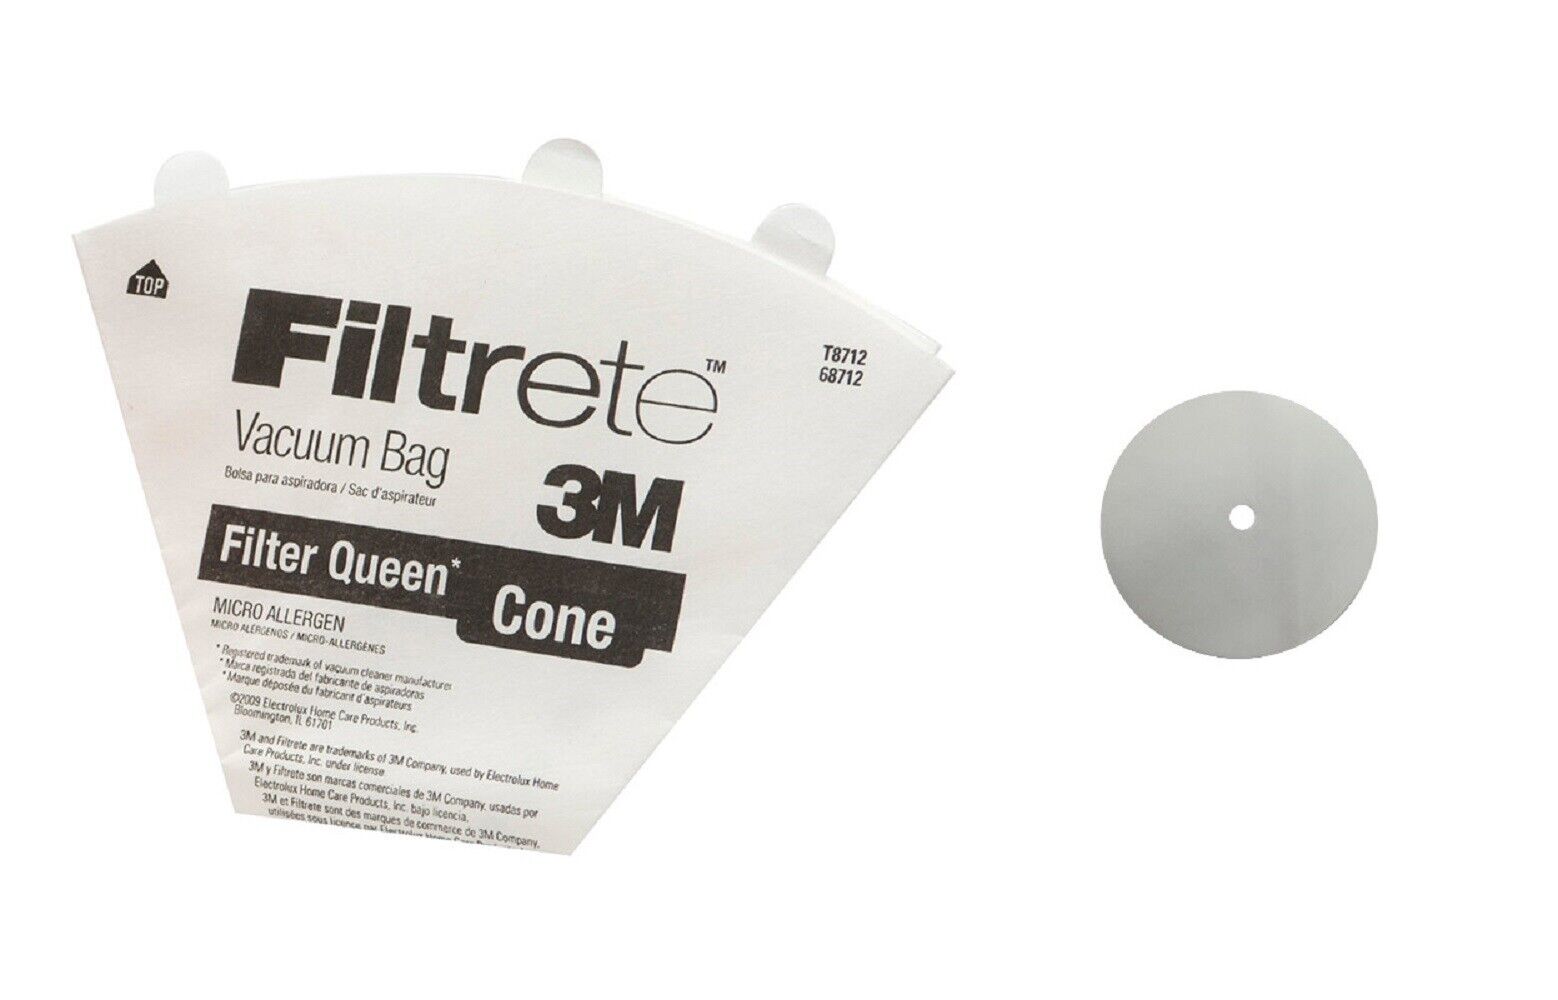 Filter Queen Filtrete Micro Allergen Cone 3 in Pack and 1 Round Filter -  68712